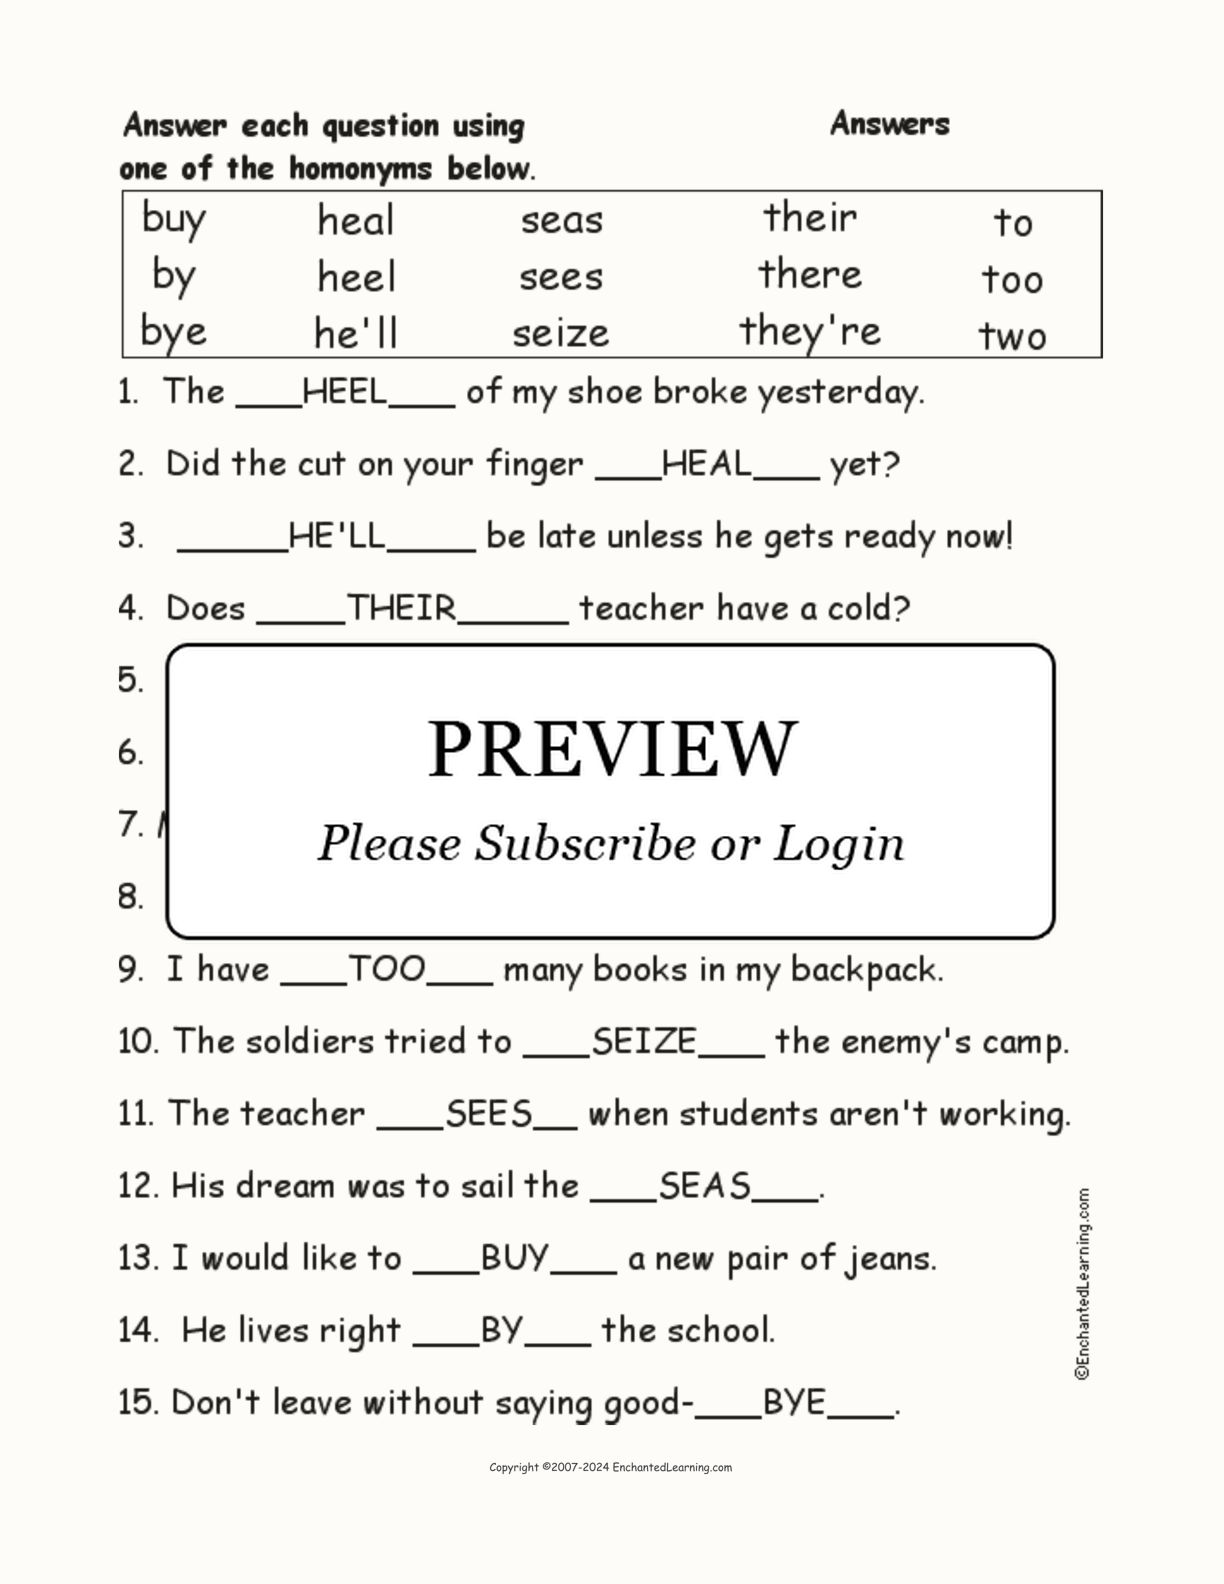 Homonyms Spelling Word Questions #1 interactive worksheet page 2